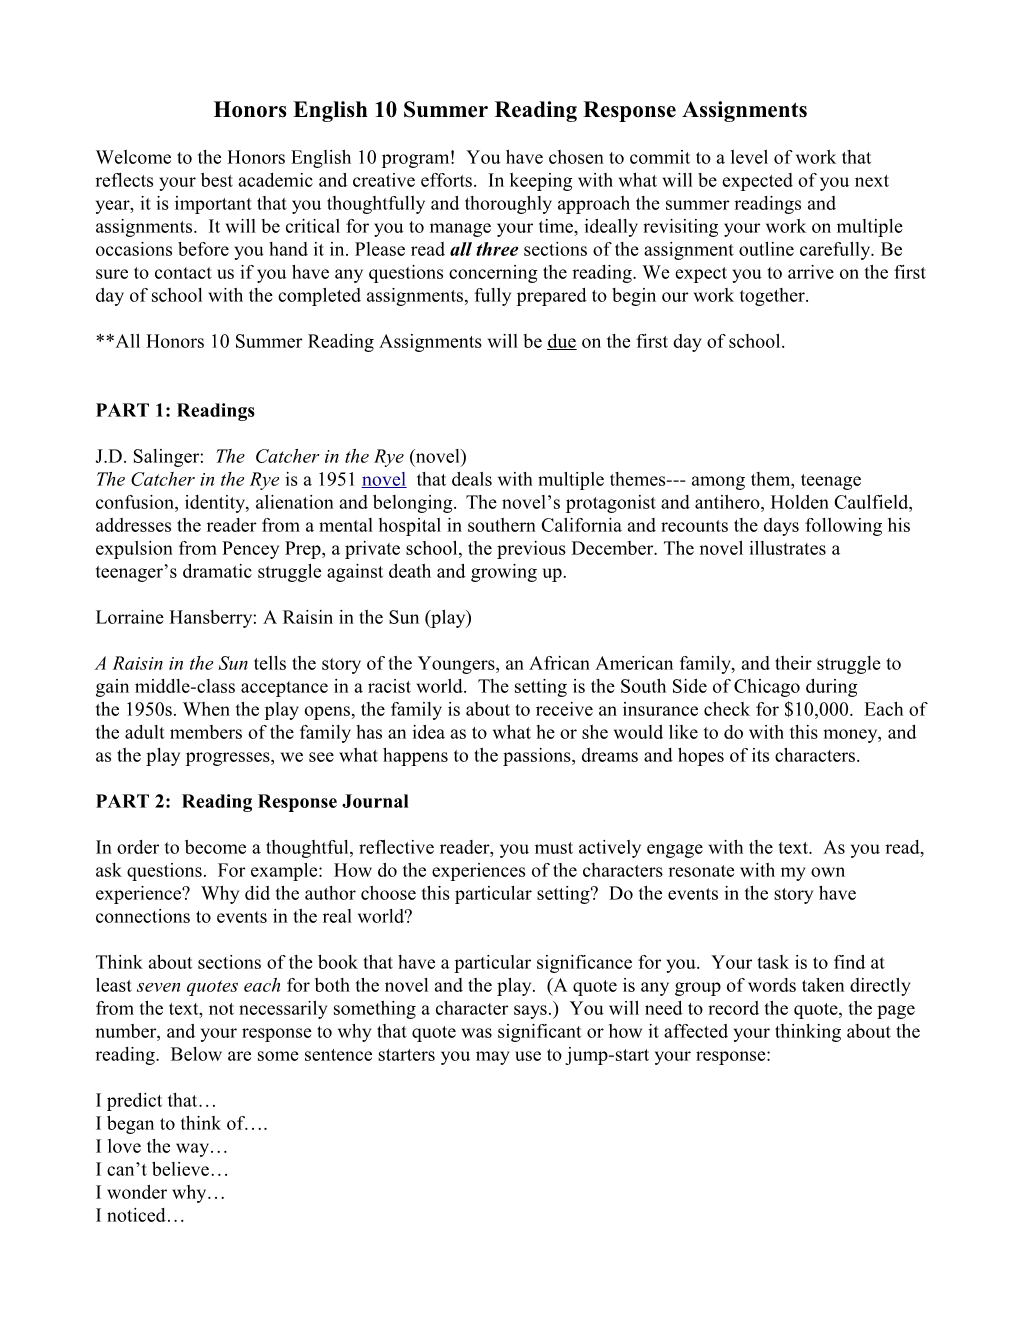 Honors English 10 Summer Reading Response Assignments